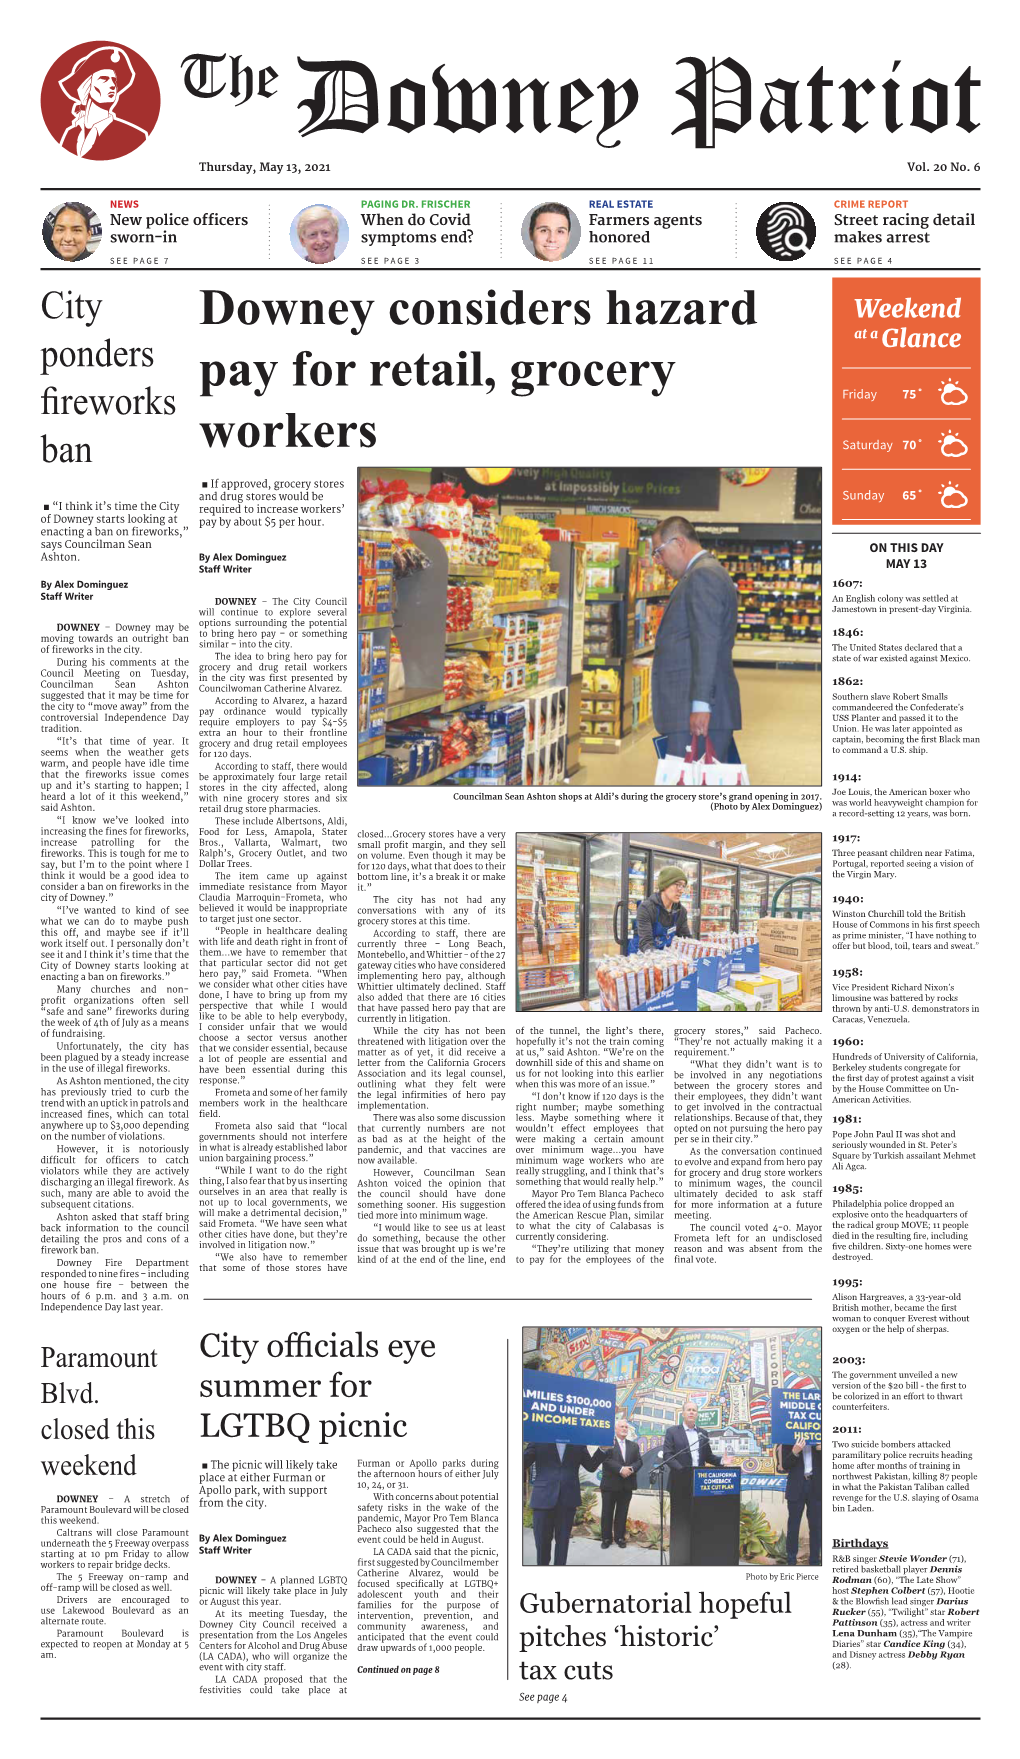 Downey Considers Hazard Pay for Retail, Grocery Workers